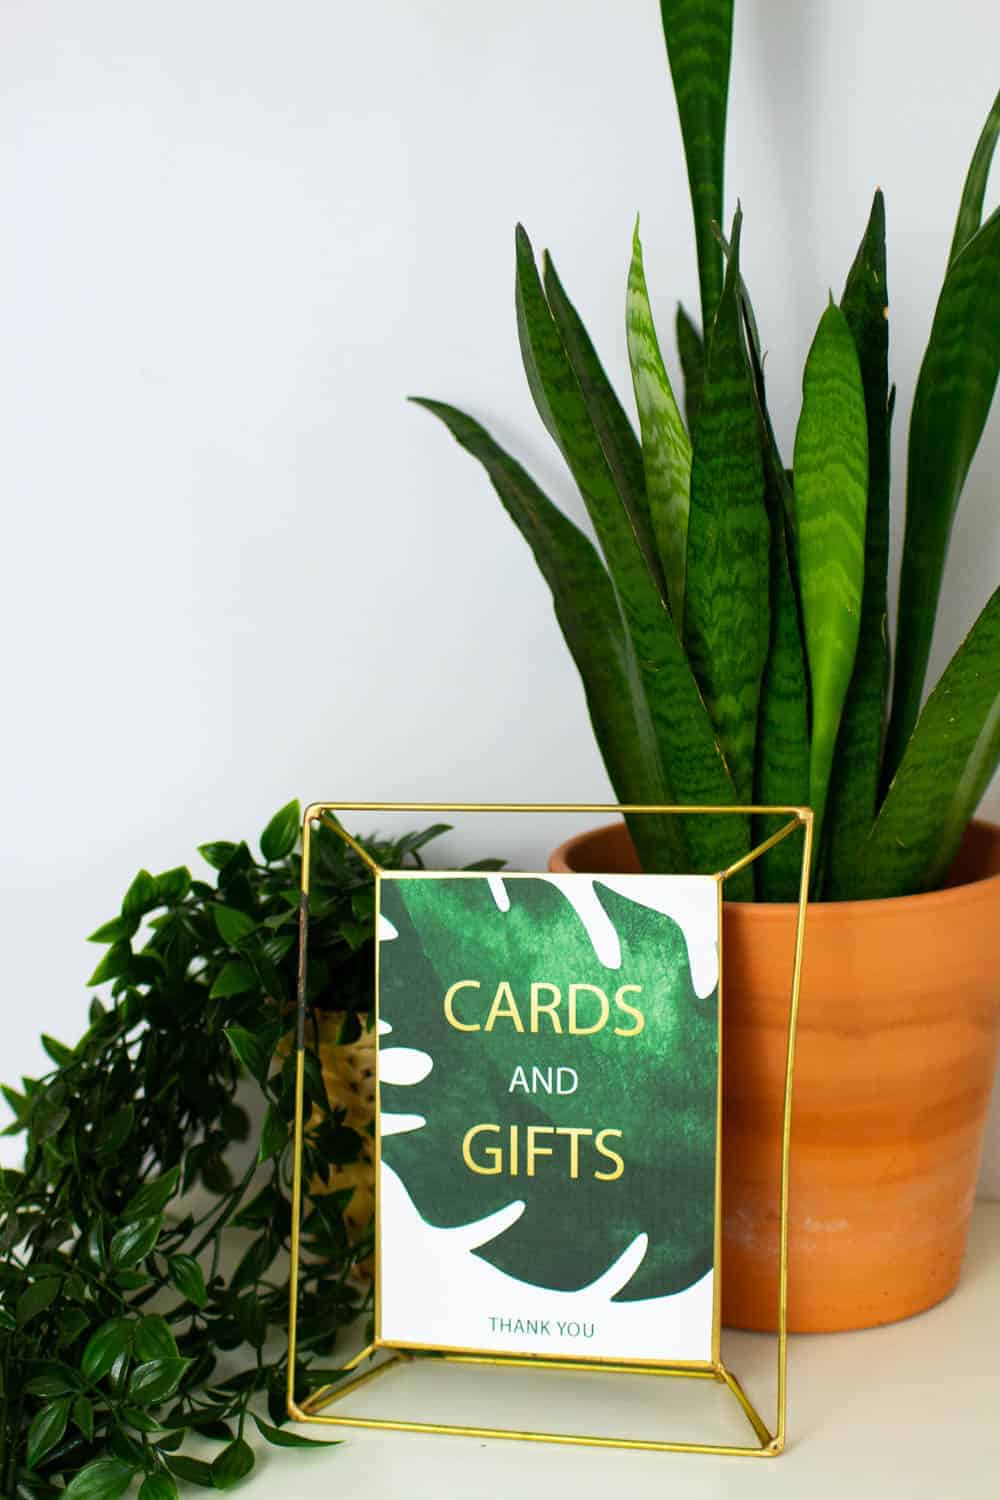 Cards and Gifts Sign Books and Cards Sign WLP-EUU 4198 Greenery Cards Sign Greenery Cards and Gifts TEMPLETT Gifts Table Sign